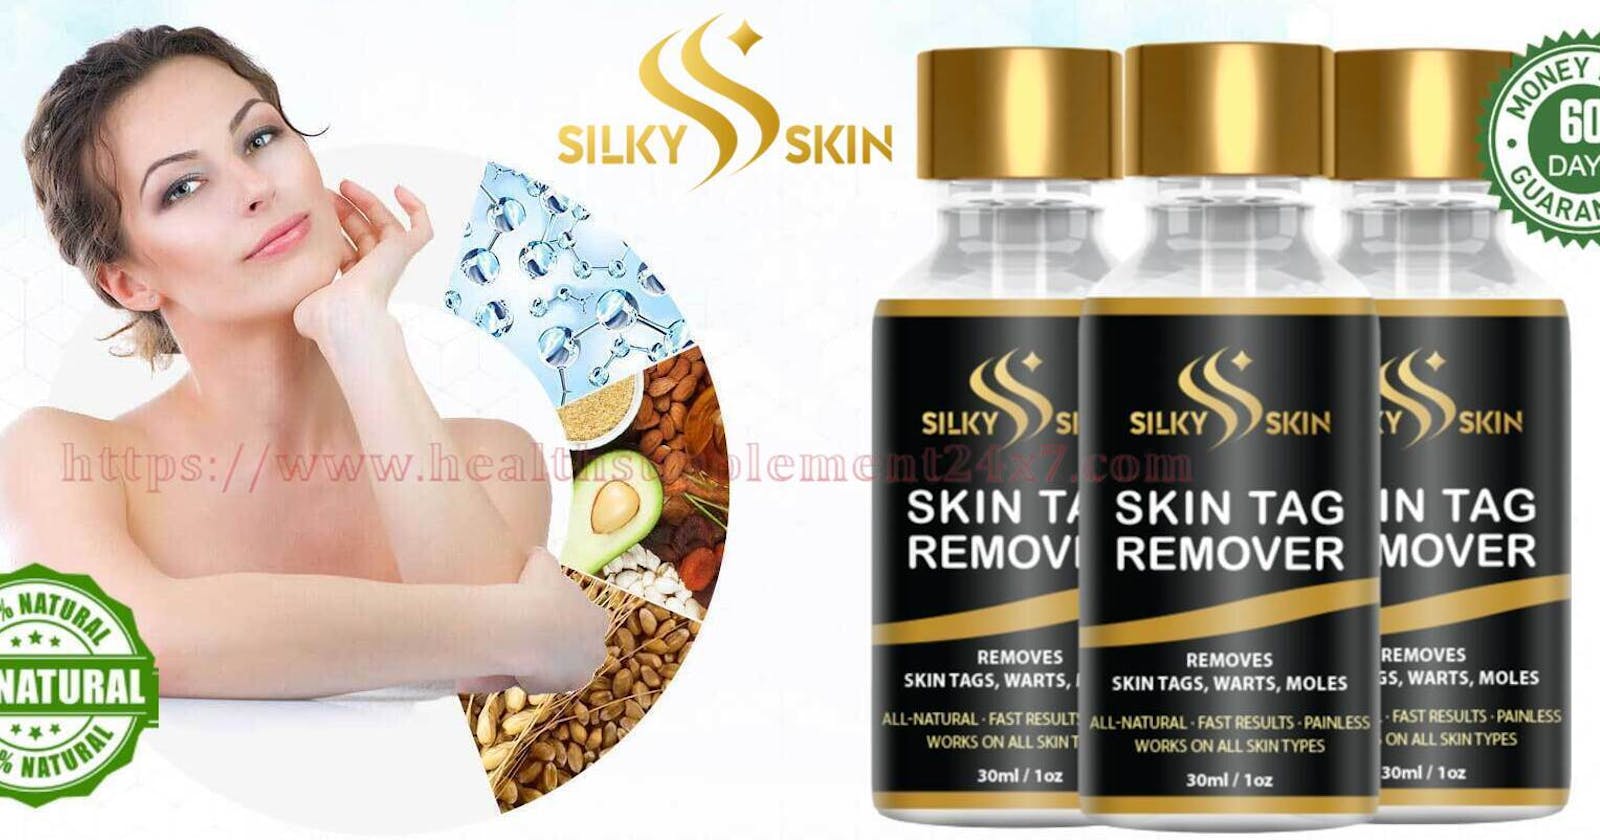 Silky Skin Tag Remover Will Remove Dark Moles | Light Moles | Big Warts Permanently[Get 100% Genuine Result](REAL OR HOAX)